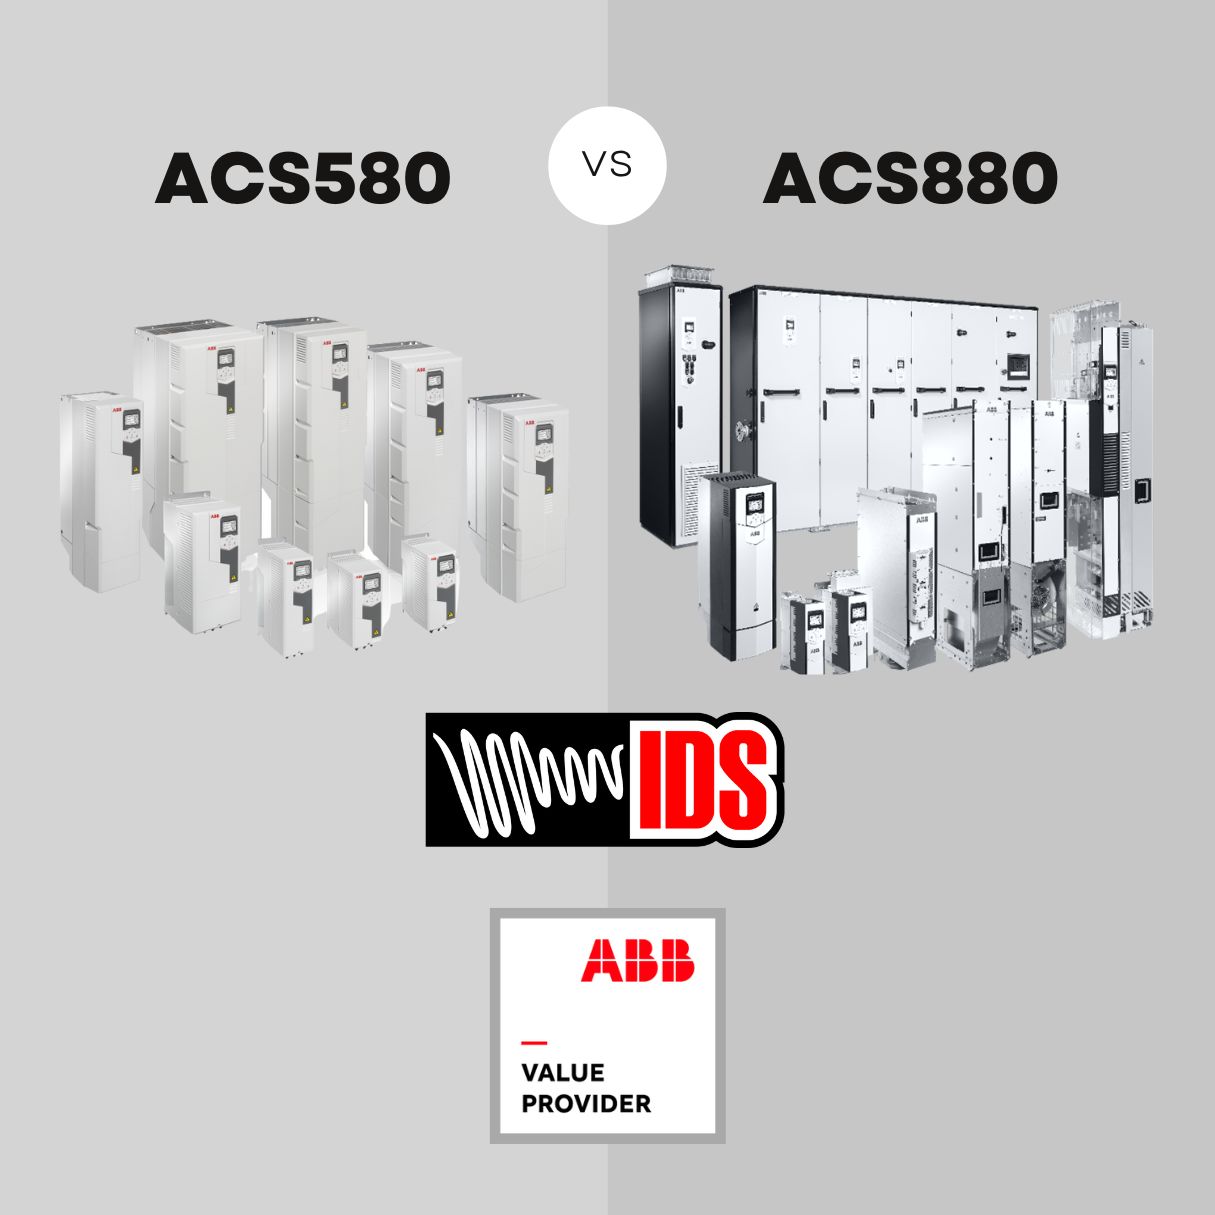 ABB Drives ACS580 or ACS880 – What are the differences?